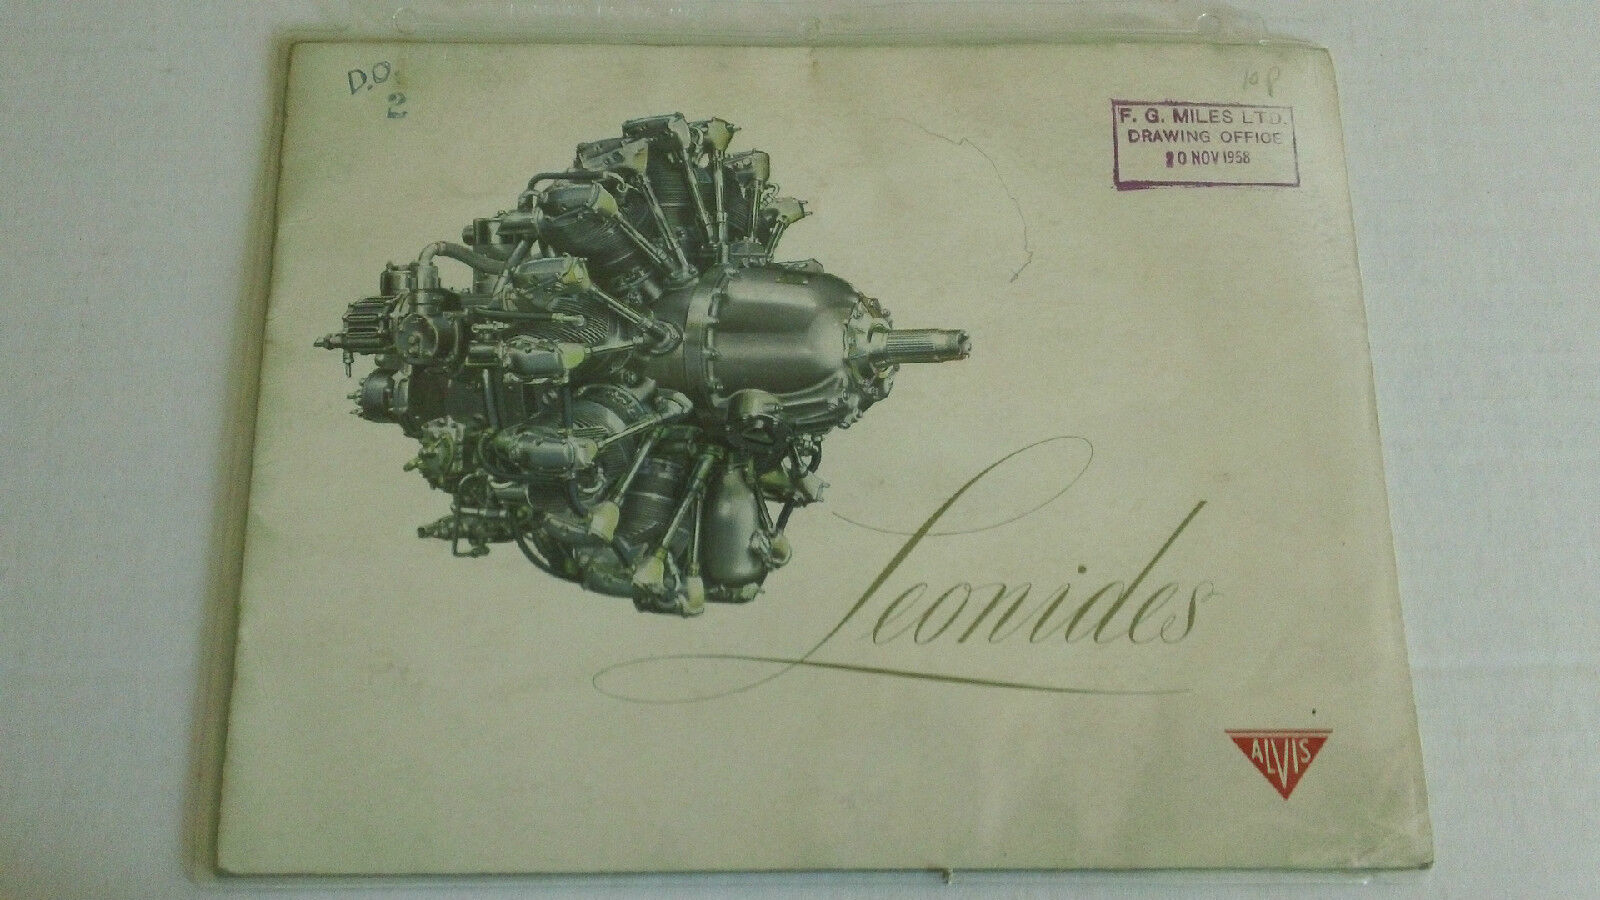 Leonides Aero Alvis Airplane Helicopter Engine England booklet book guidebook 